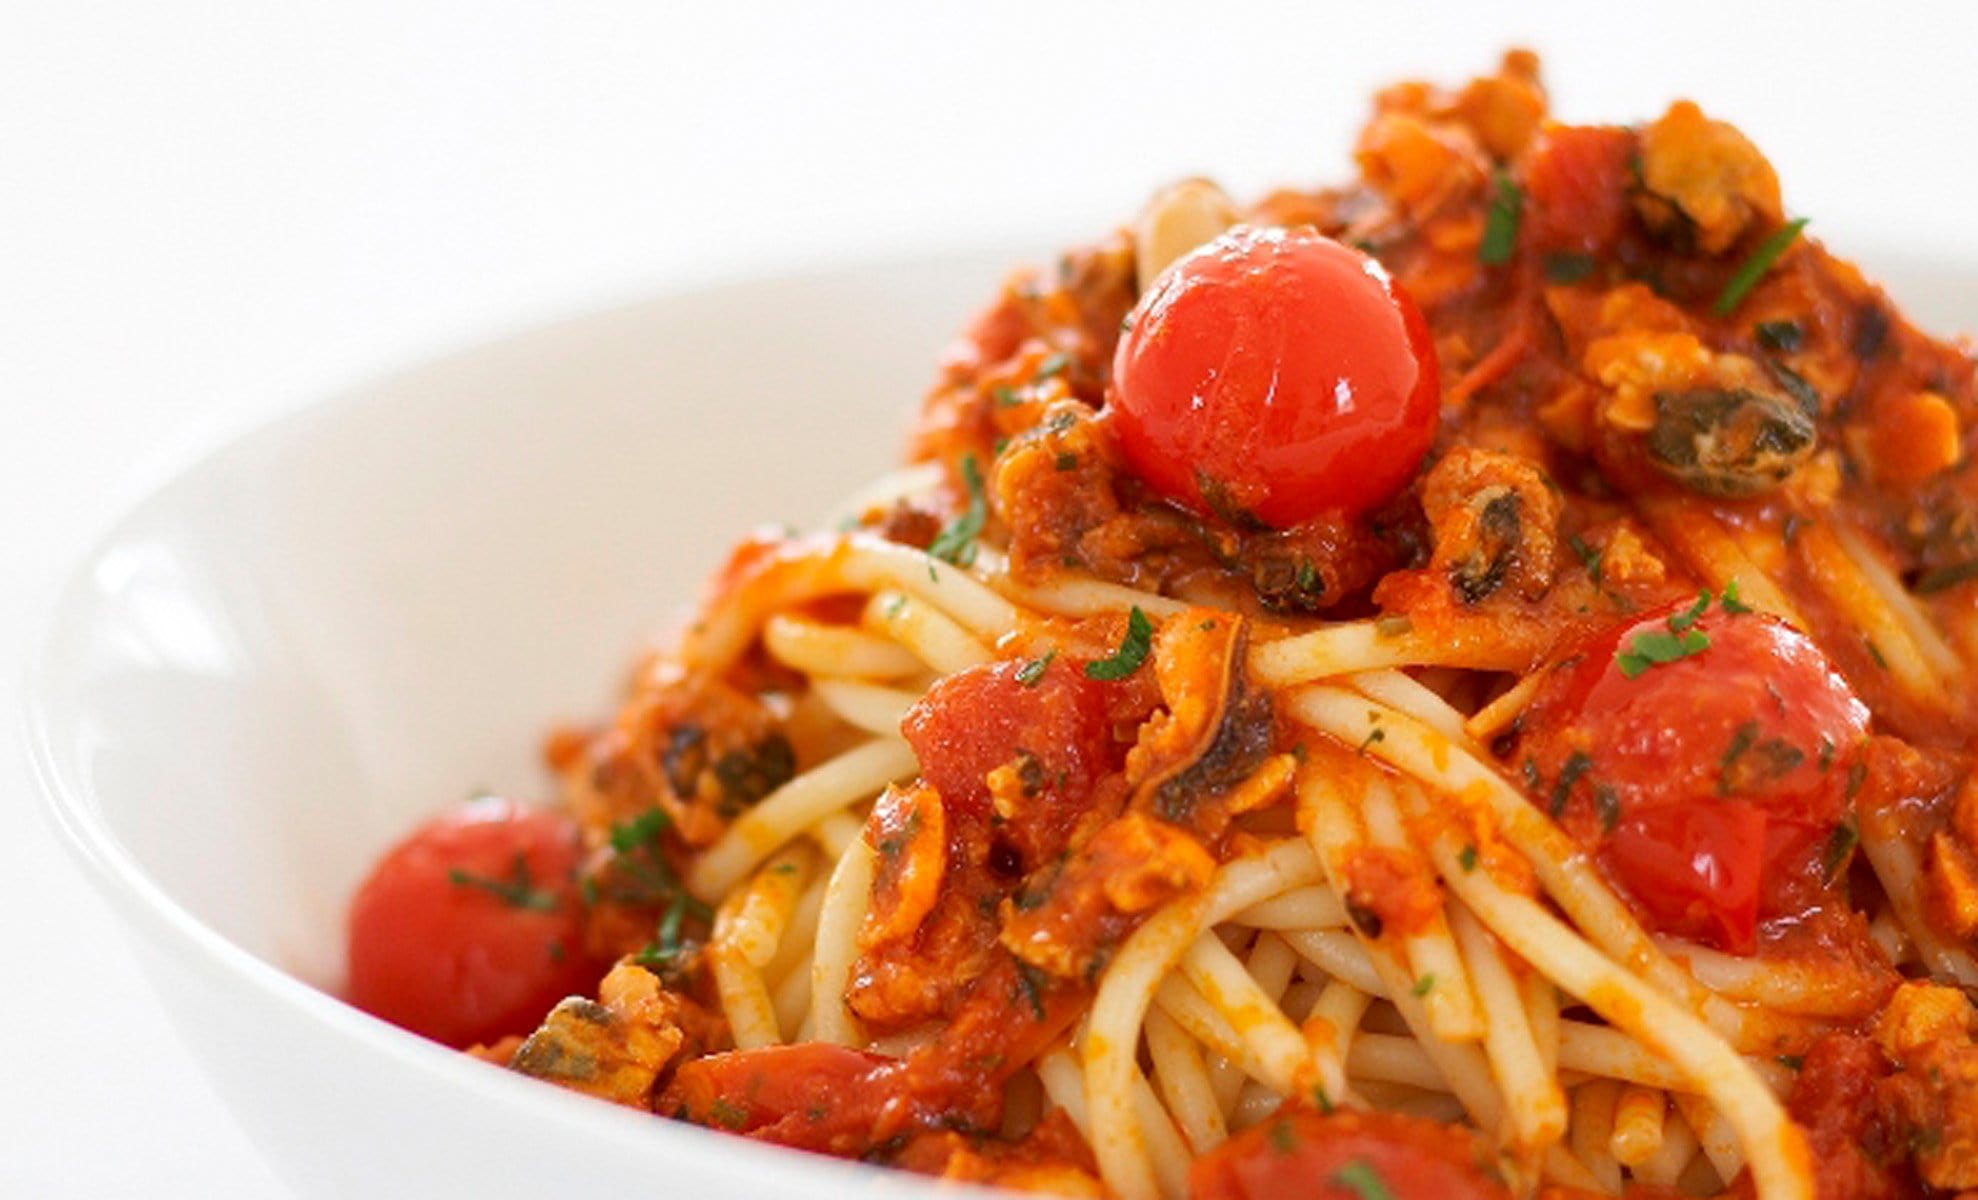 Spaghetti with Mussels & Spicy Cherry Tomato Sauce